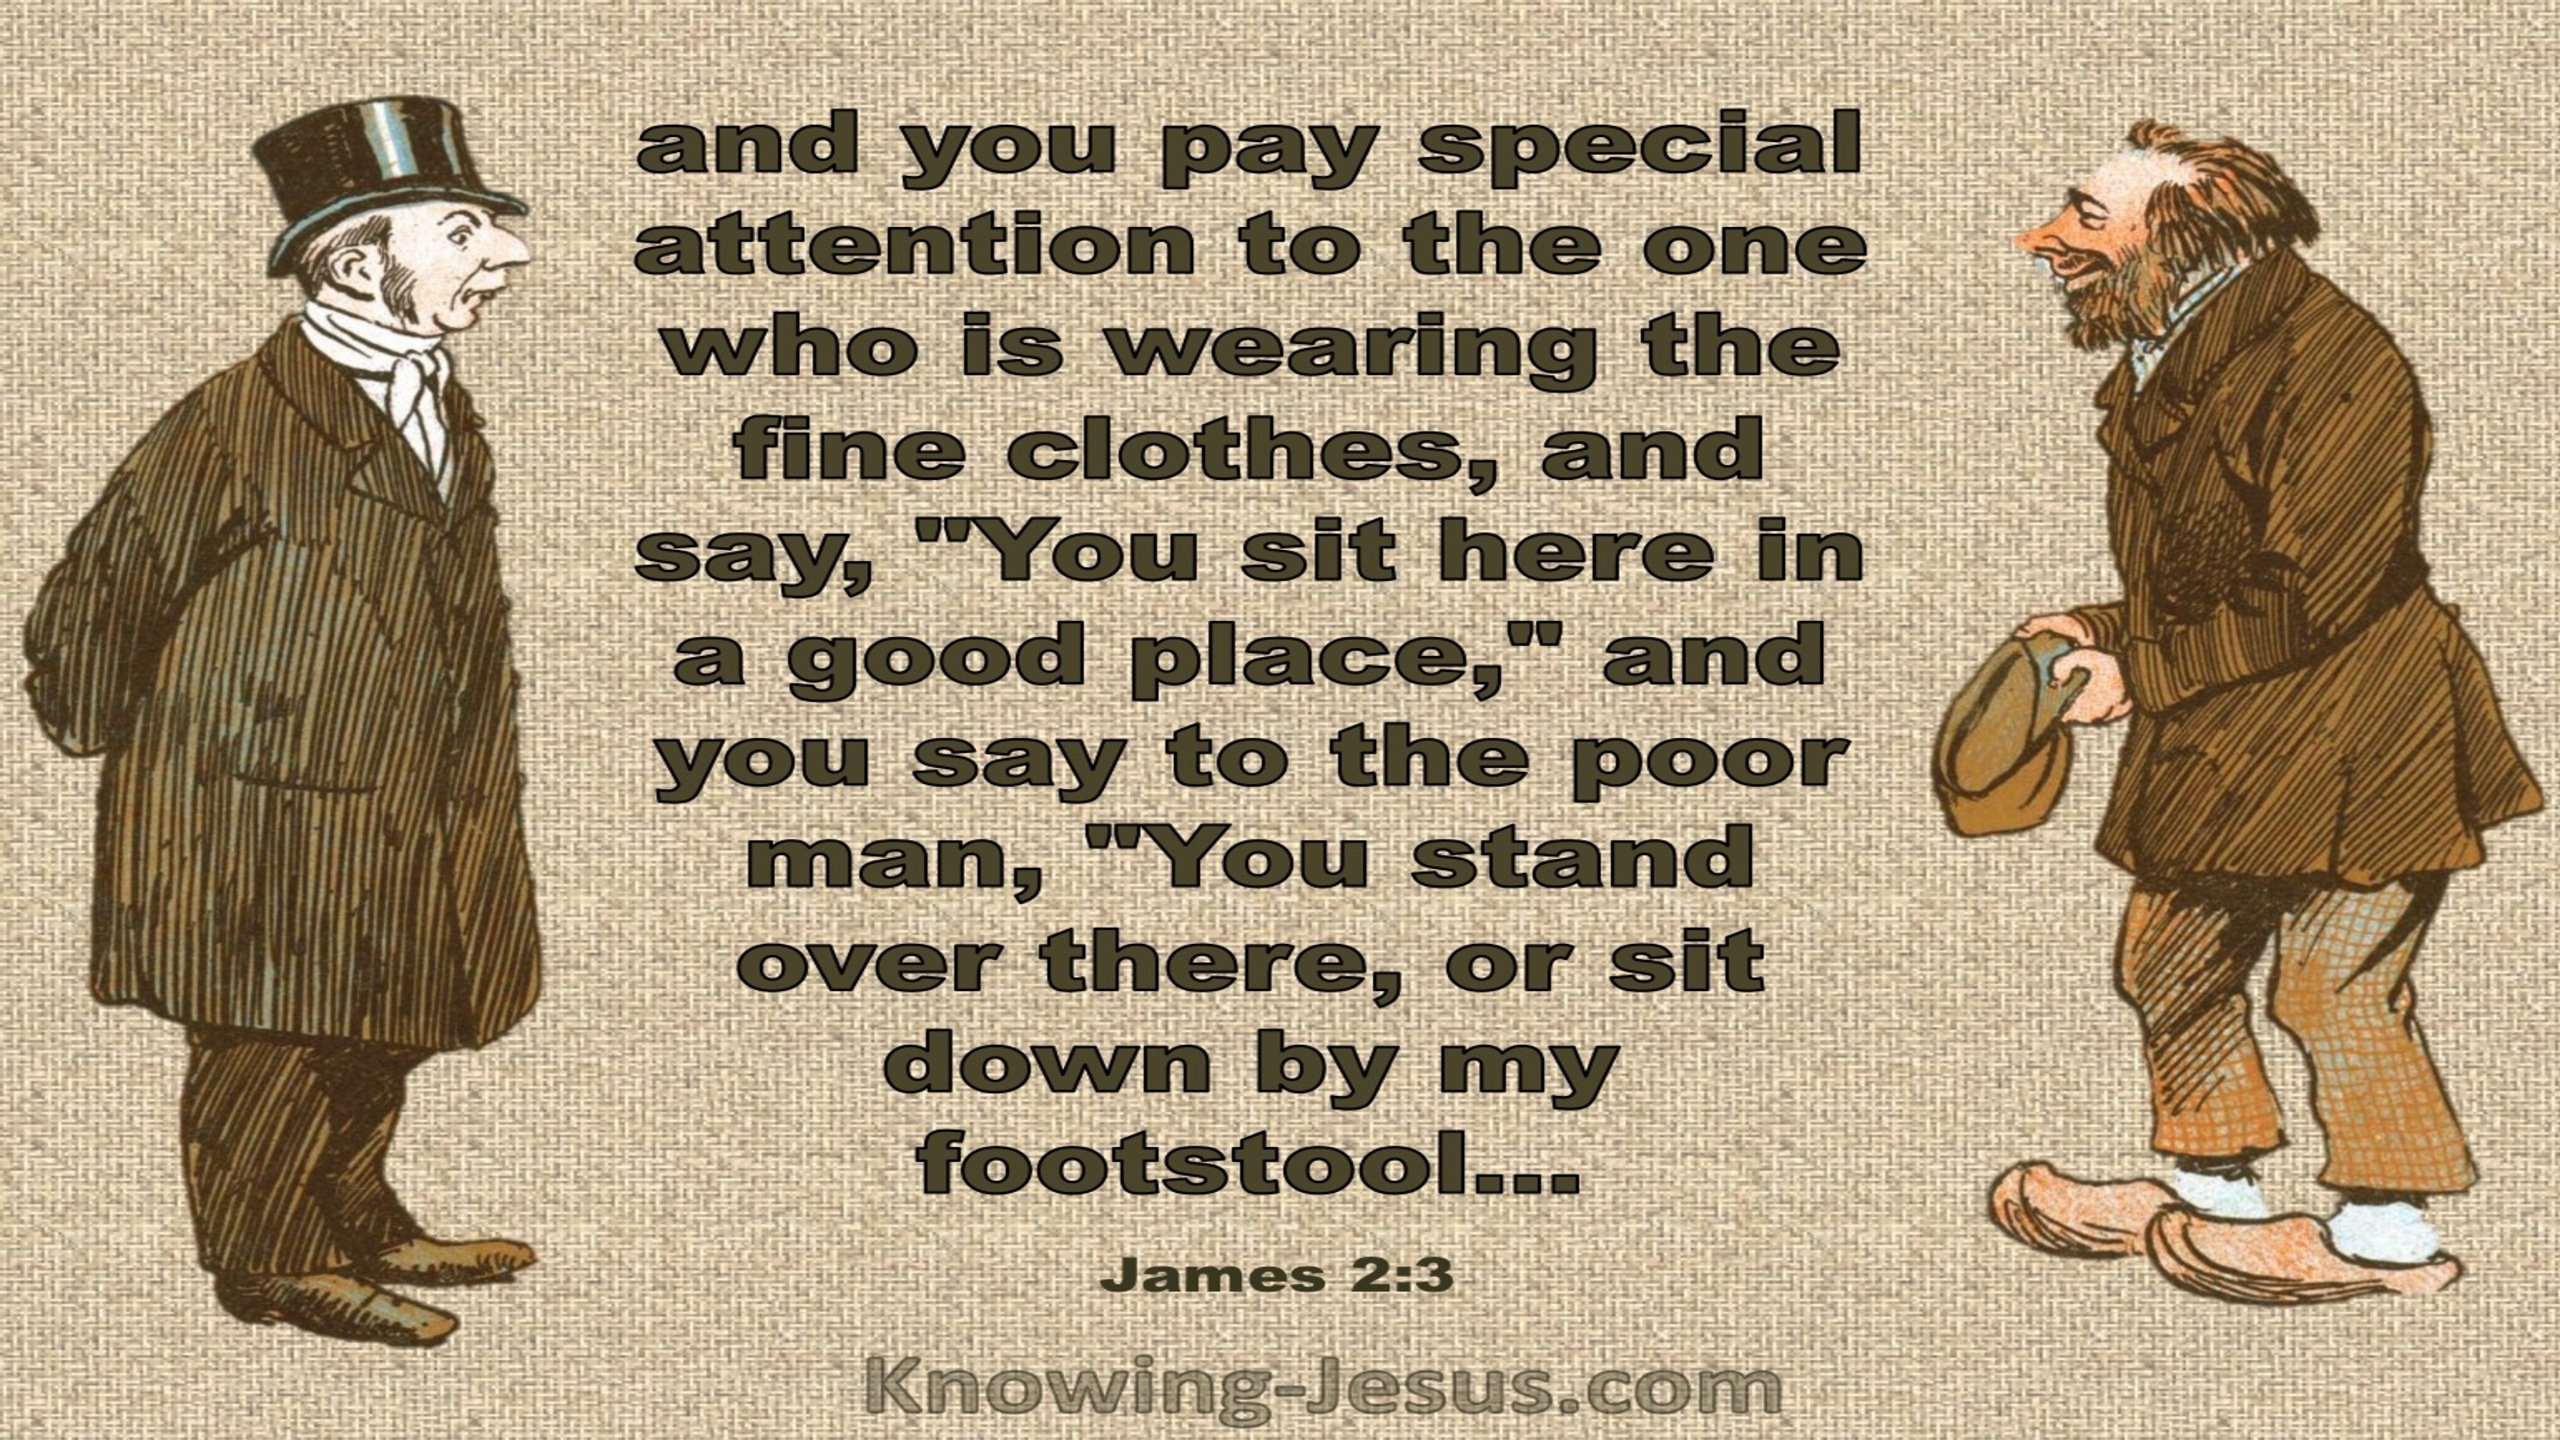 James 2:3 Do Not Shoe Favouritism (brown)